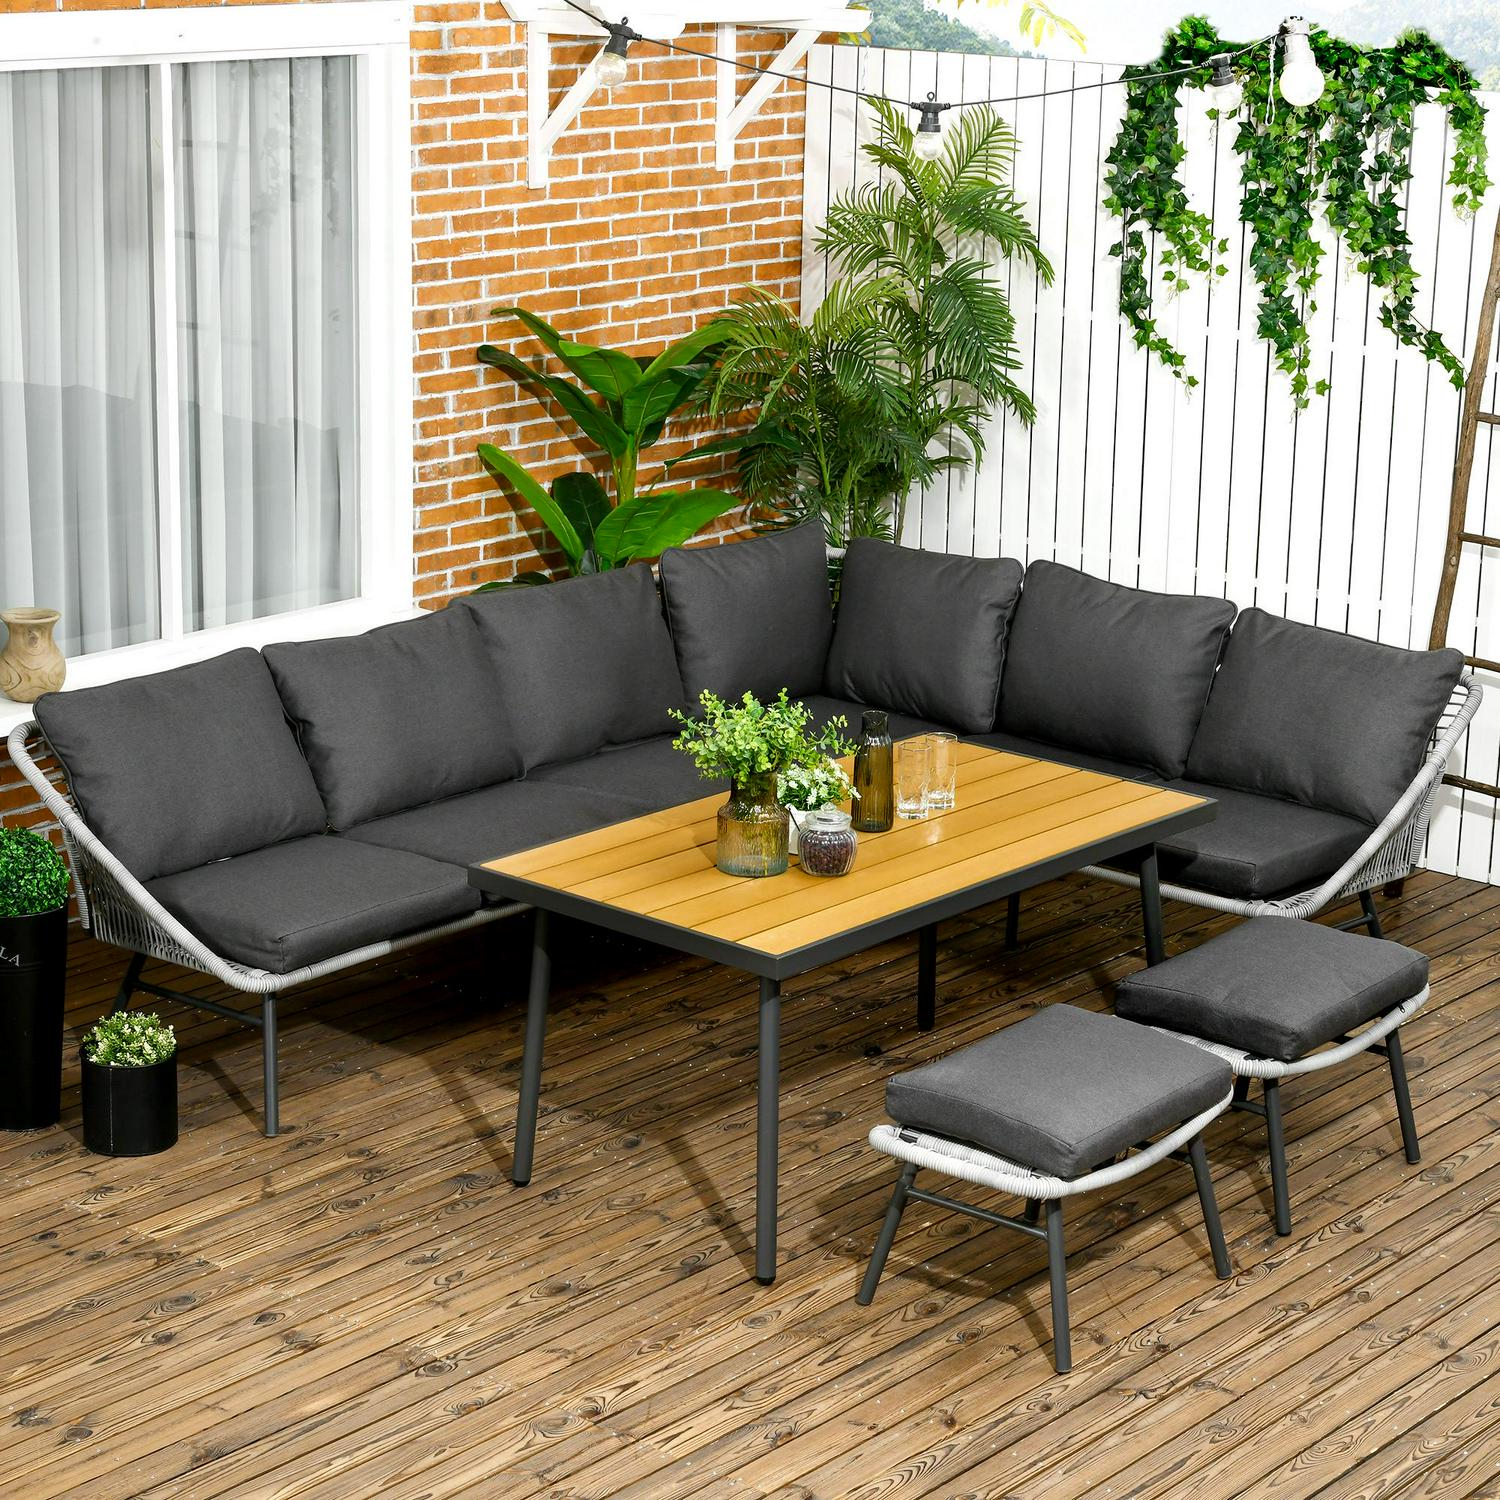 6 Seater Outdoor Rattan Garden Furniture Sets With Sofa- Grey